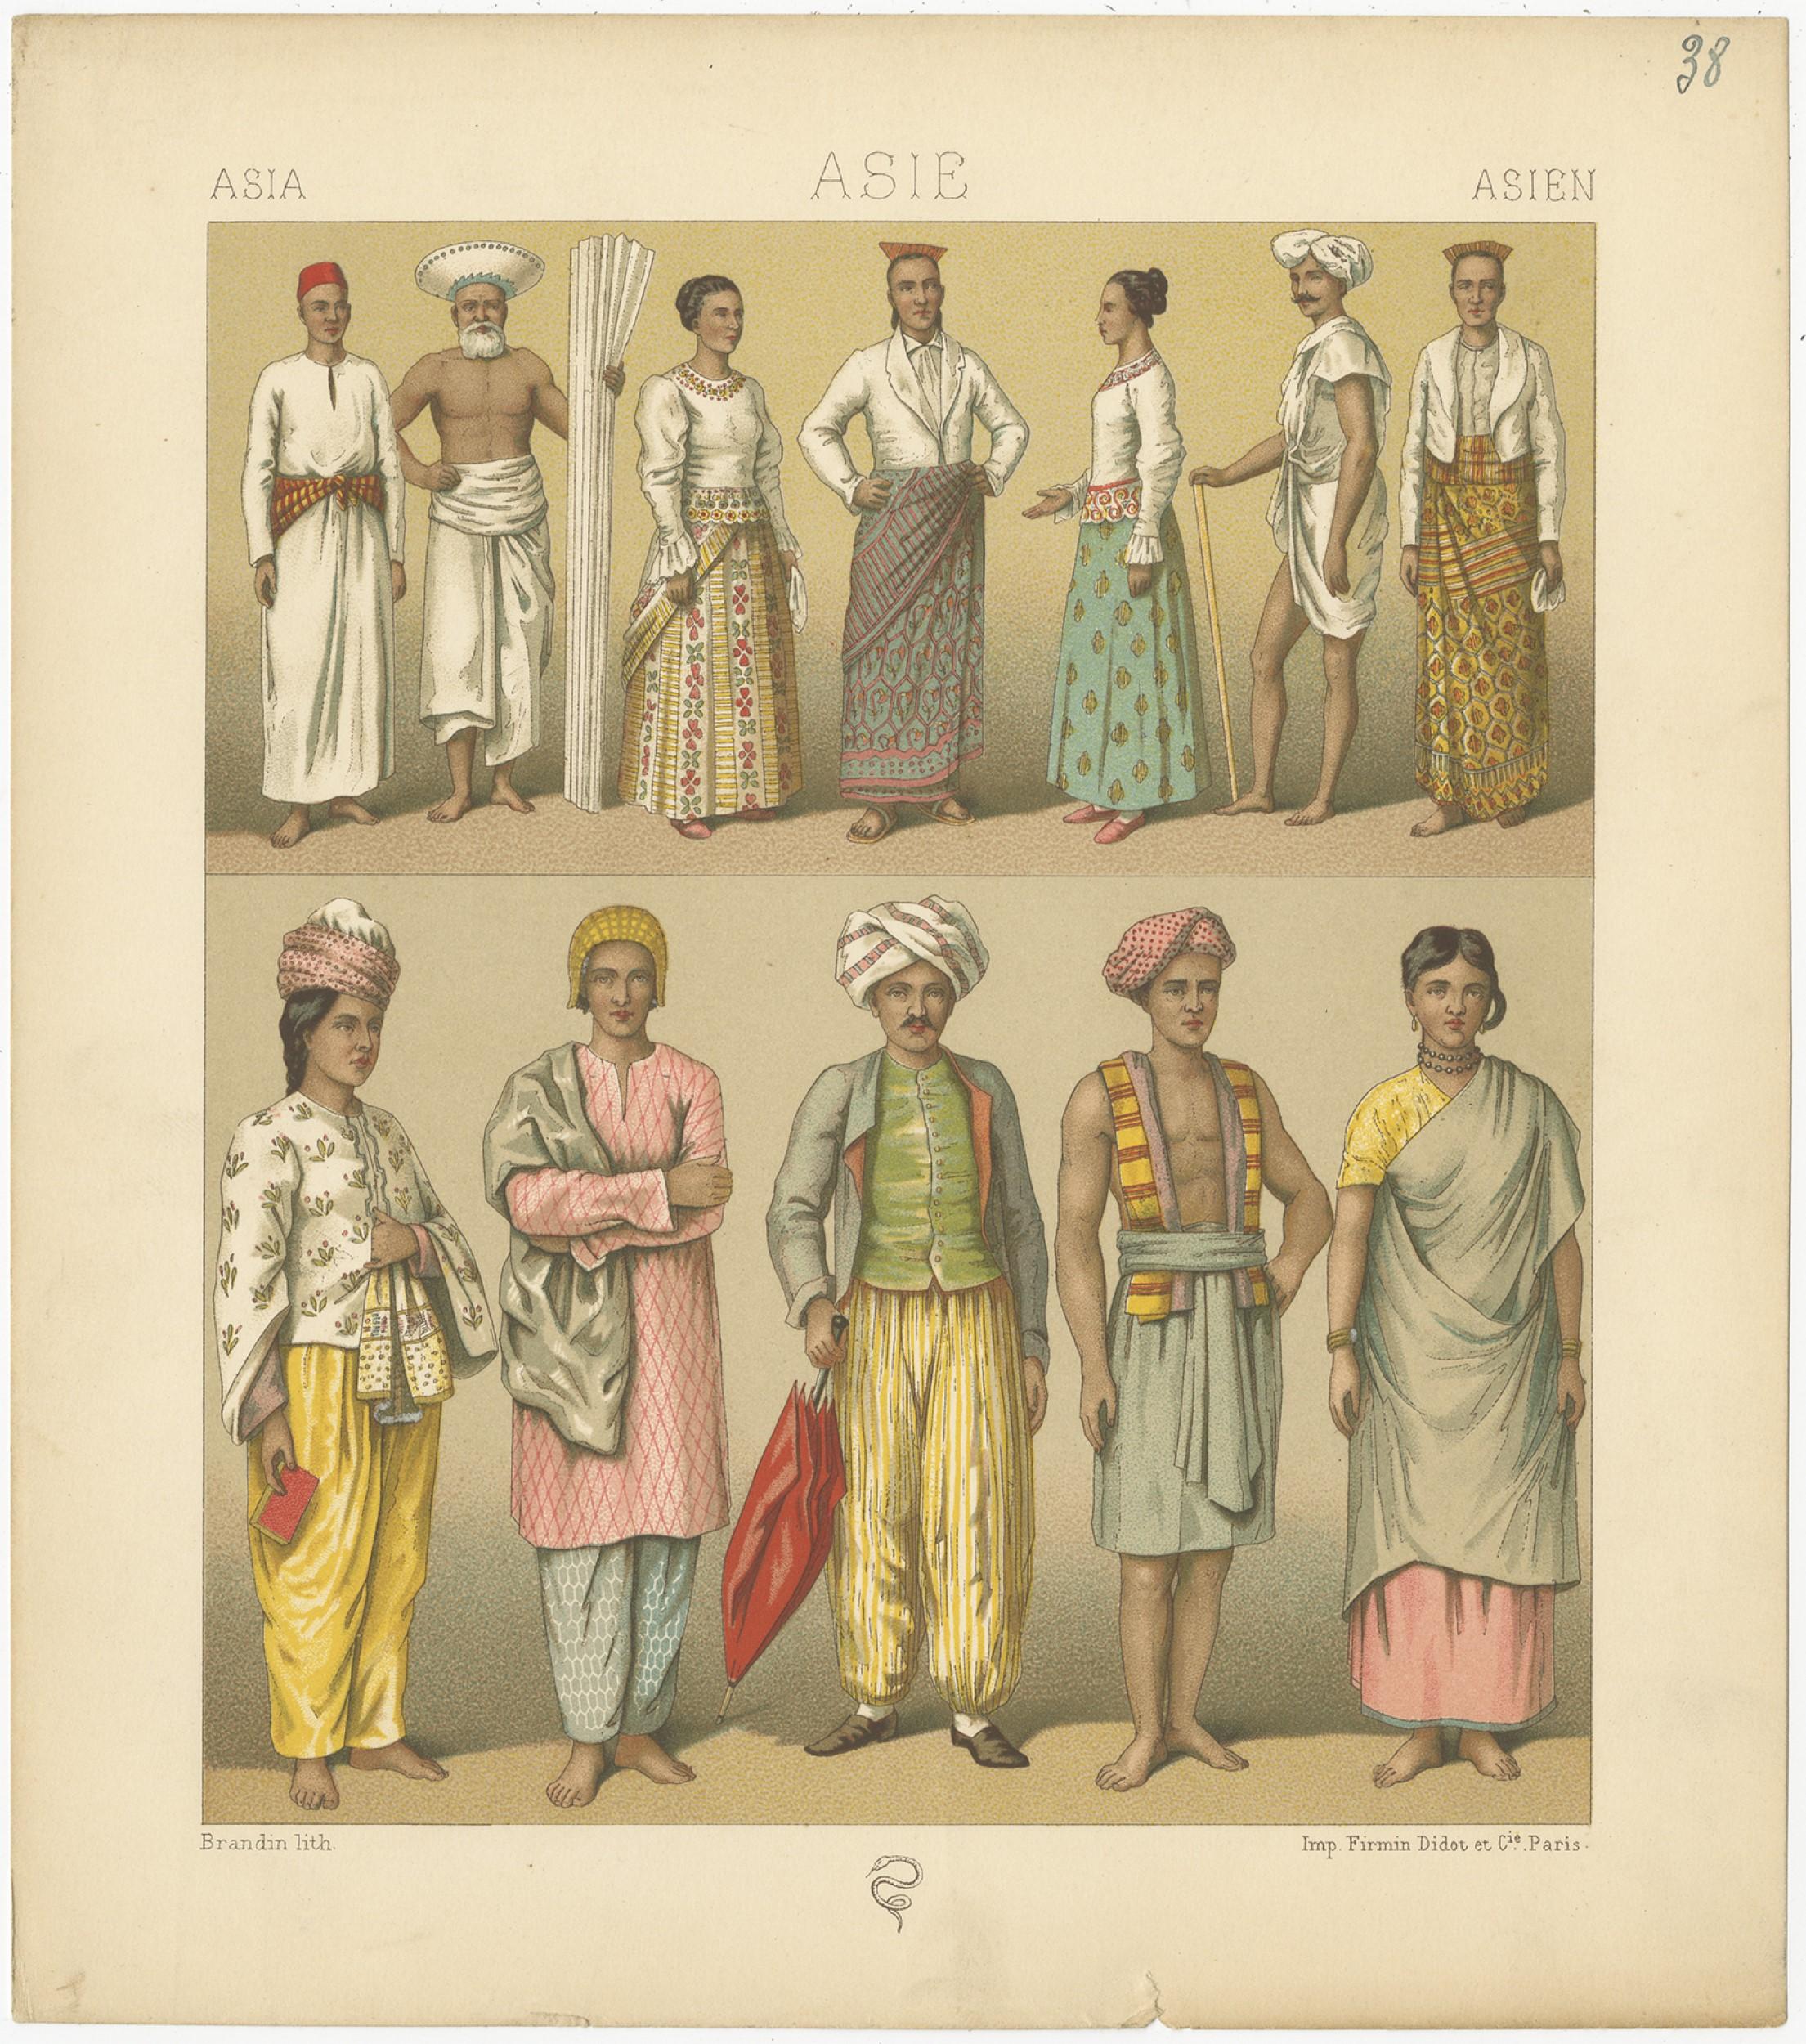 Antique print titled 'Asia - Asie - Asien'. Chromolithograph of Asian Clothing. This print originates from 'Le Costume Historique' by M.A. Racinet. Published, circa 1880.